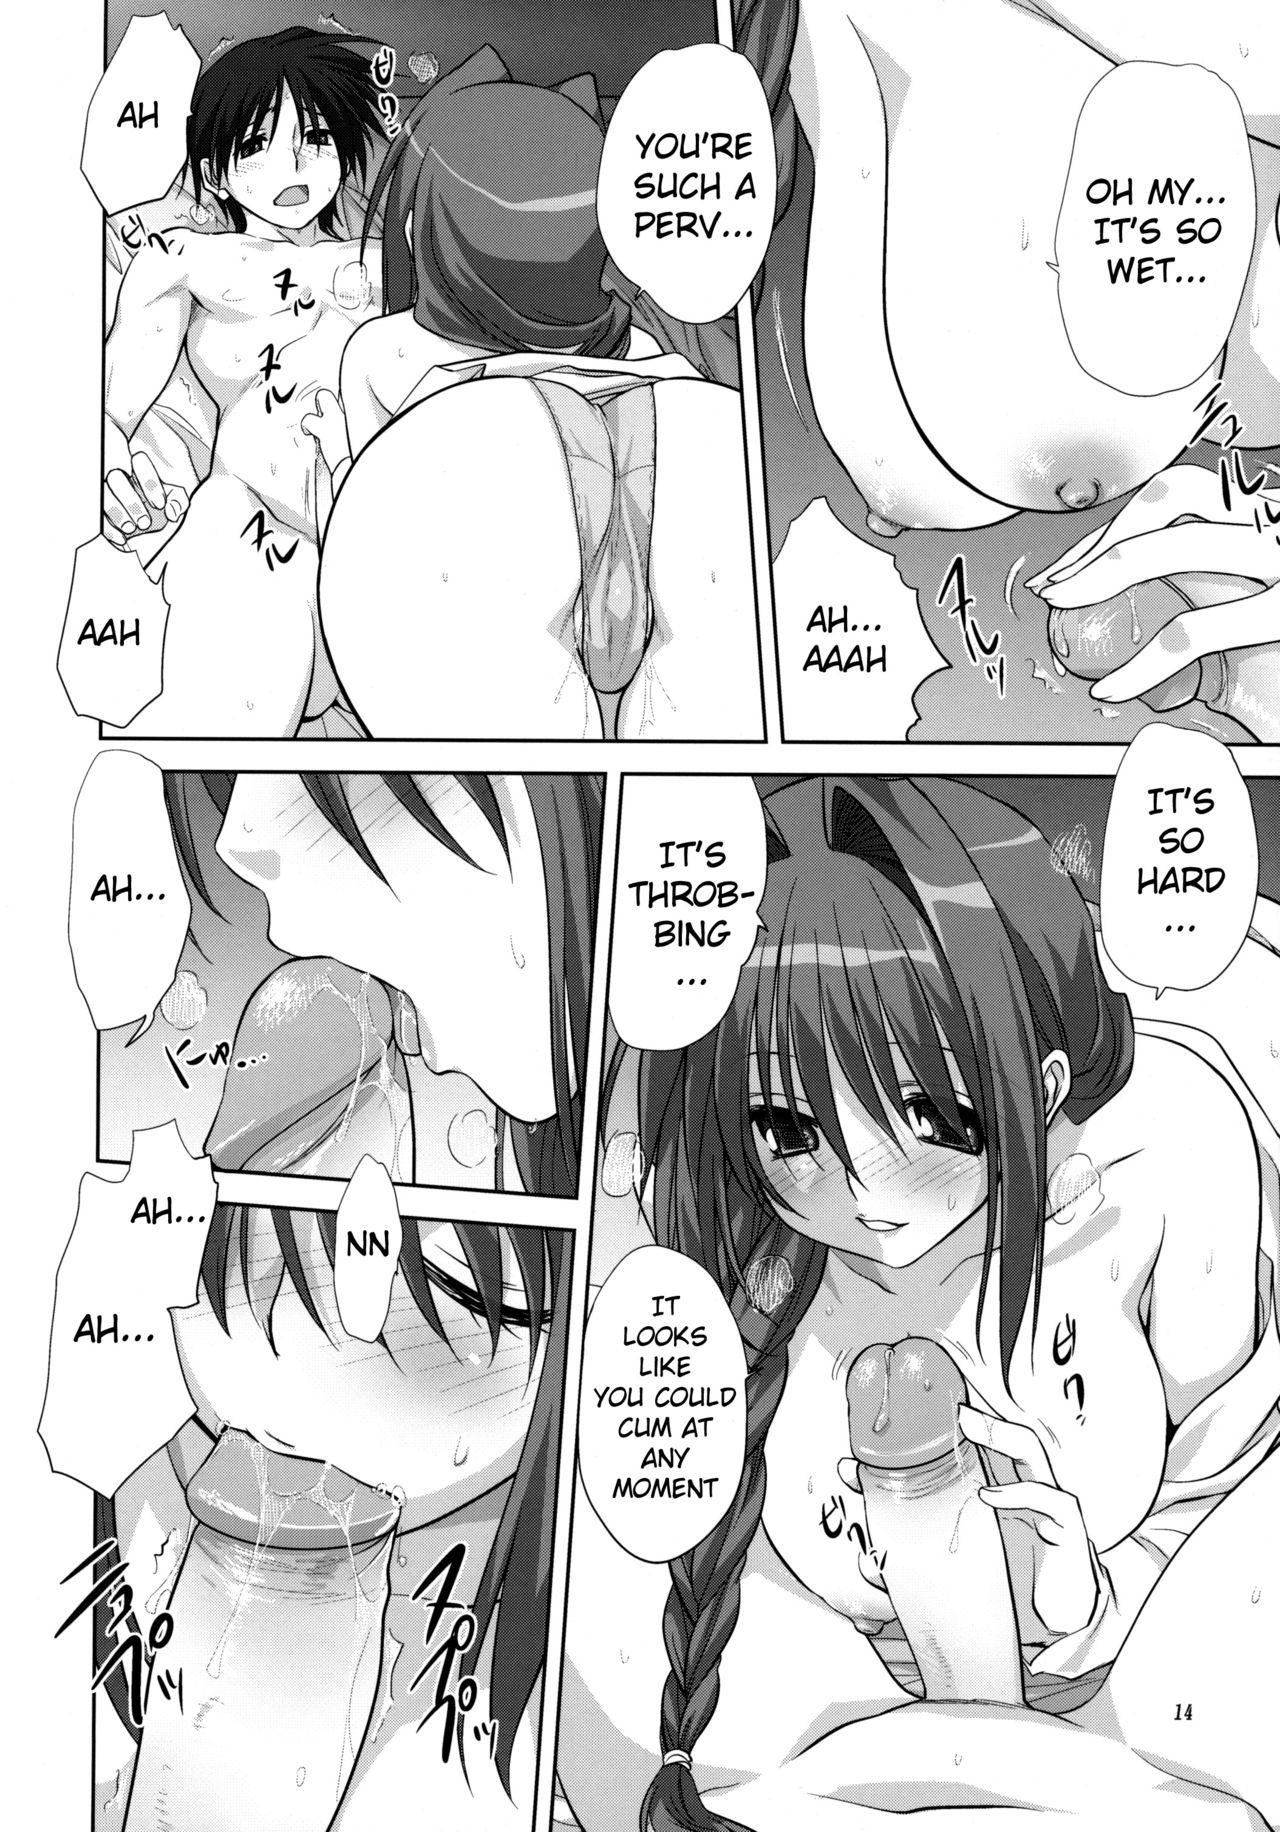 Soapy Akiko-san to Issho 7 - Kanon Relax - Page 13